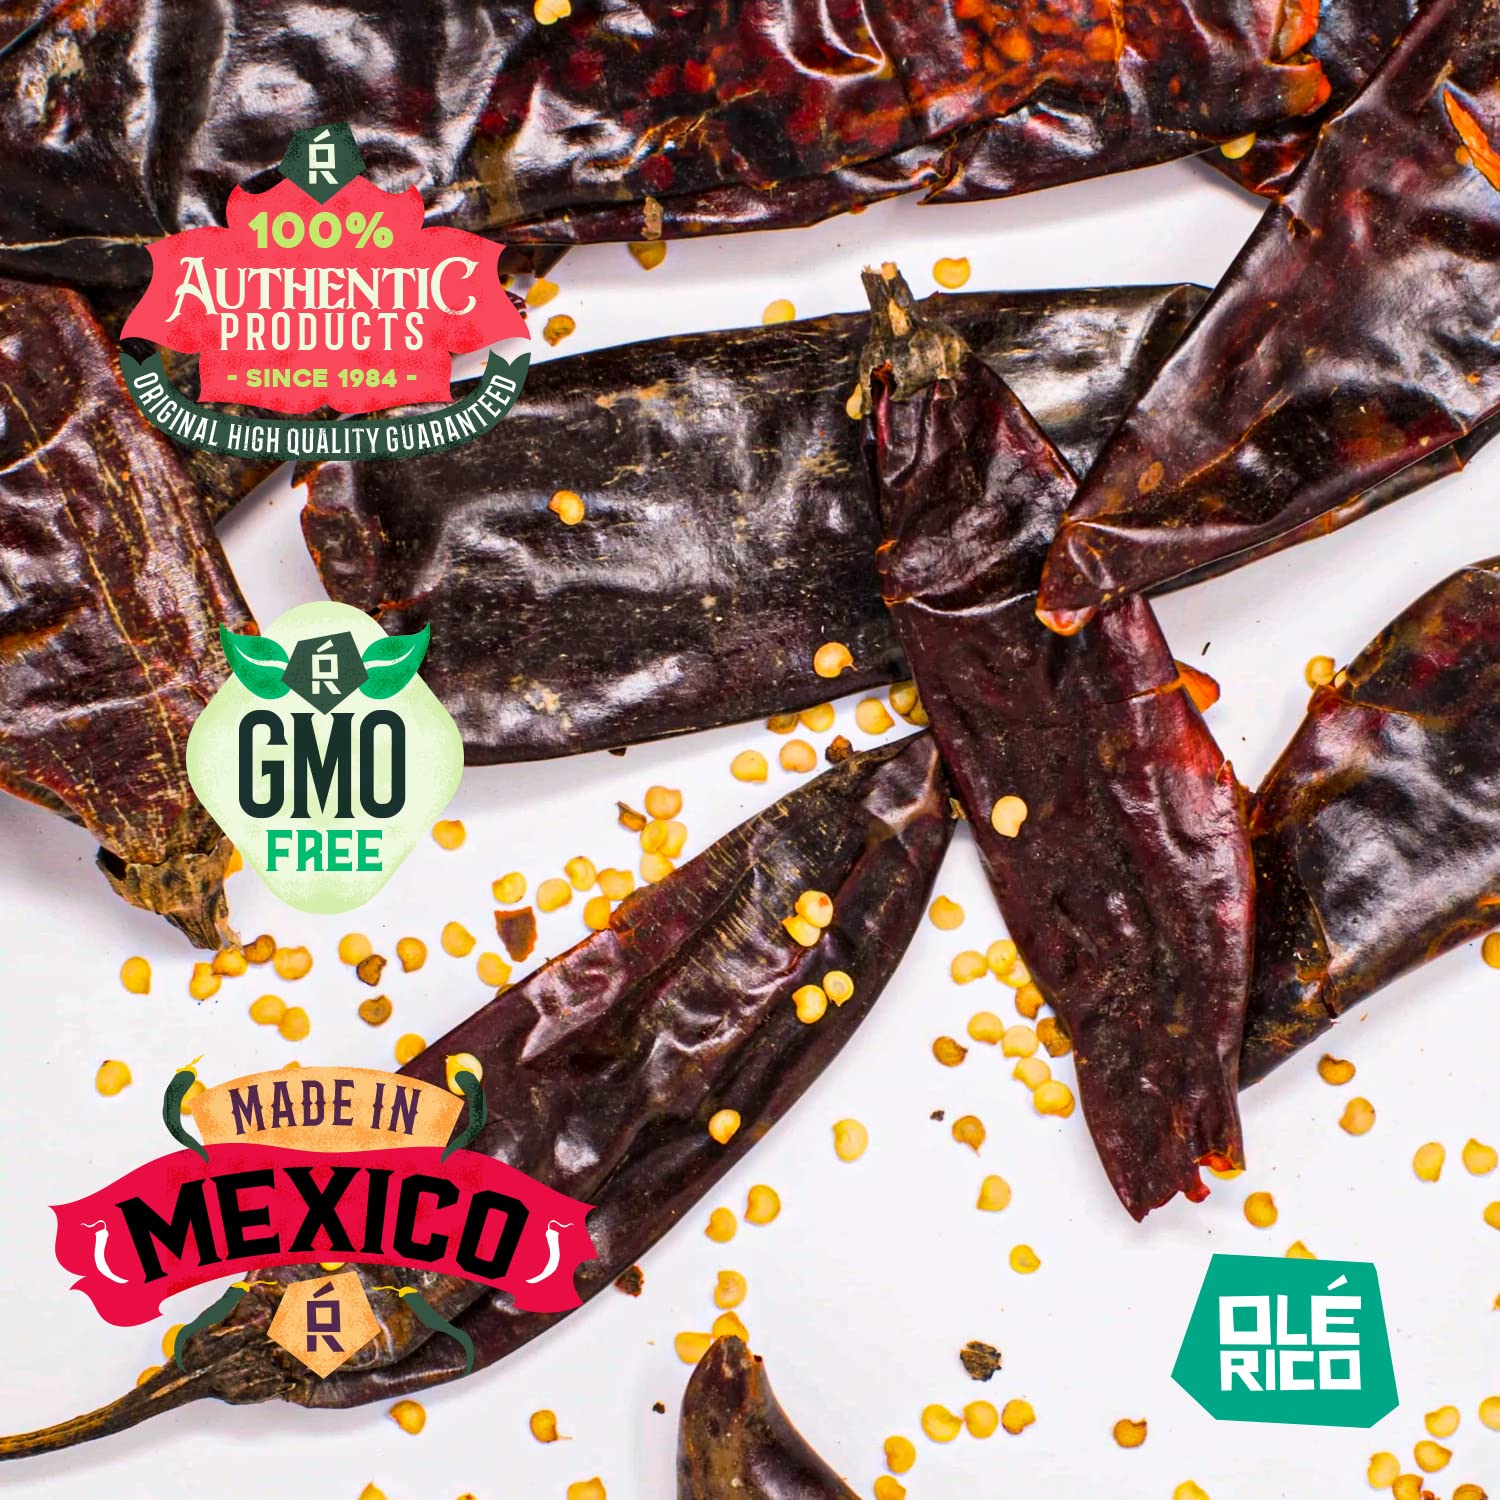 OLÉ RICO - Dried Chile Peppers 3 Pack Bundle (12 oz Total) - Ancho Chiles, Guajillo Chiles and Arbol Chiles - The Spicy Trio - Great For Mexican Recipes - Packaged In Resealable Bags - image 3 of 9